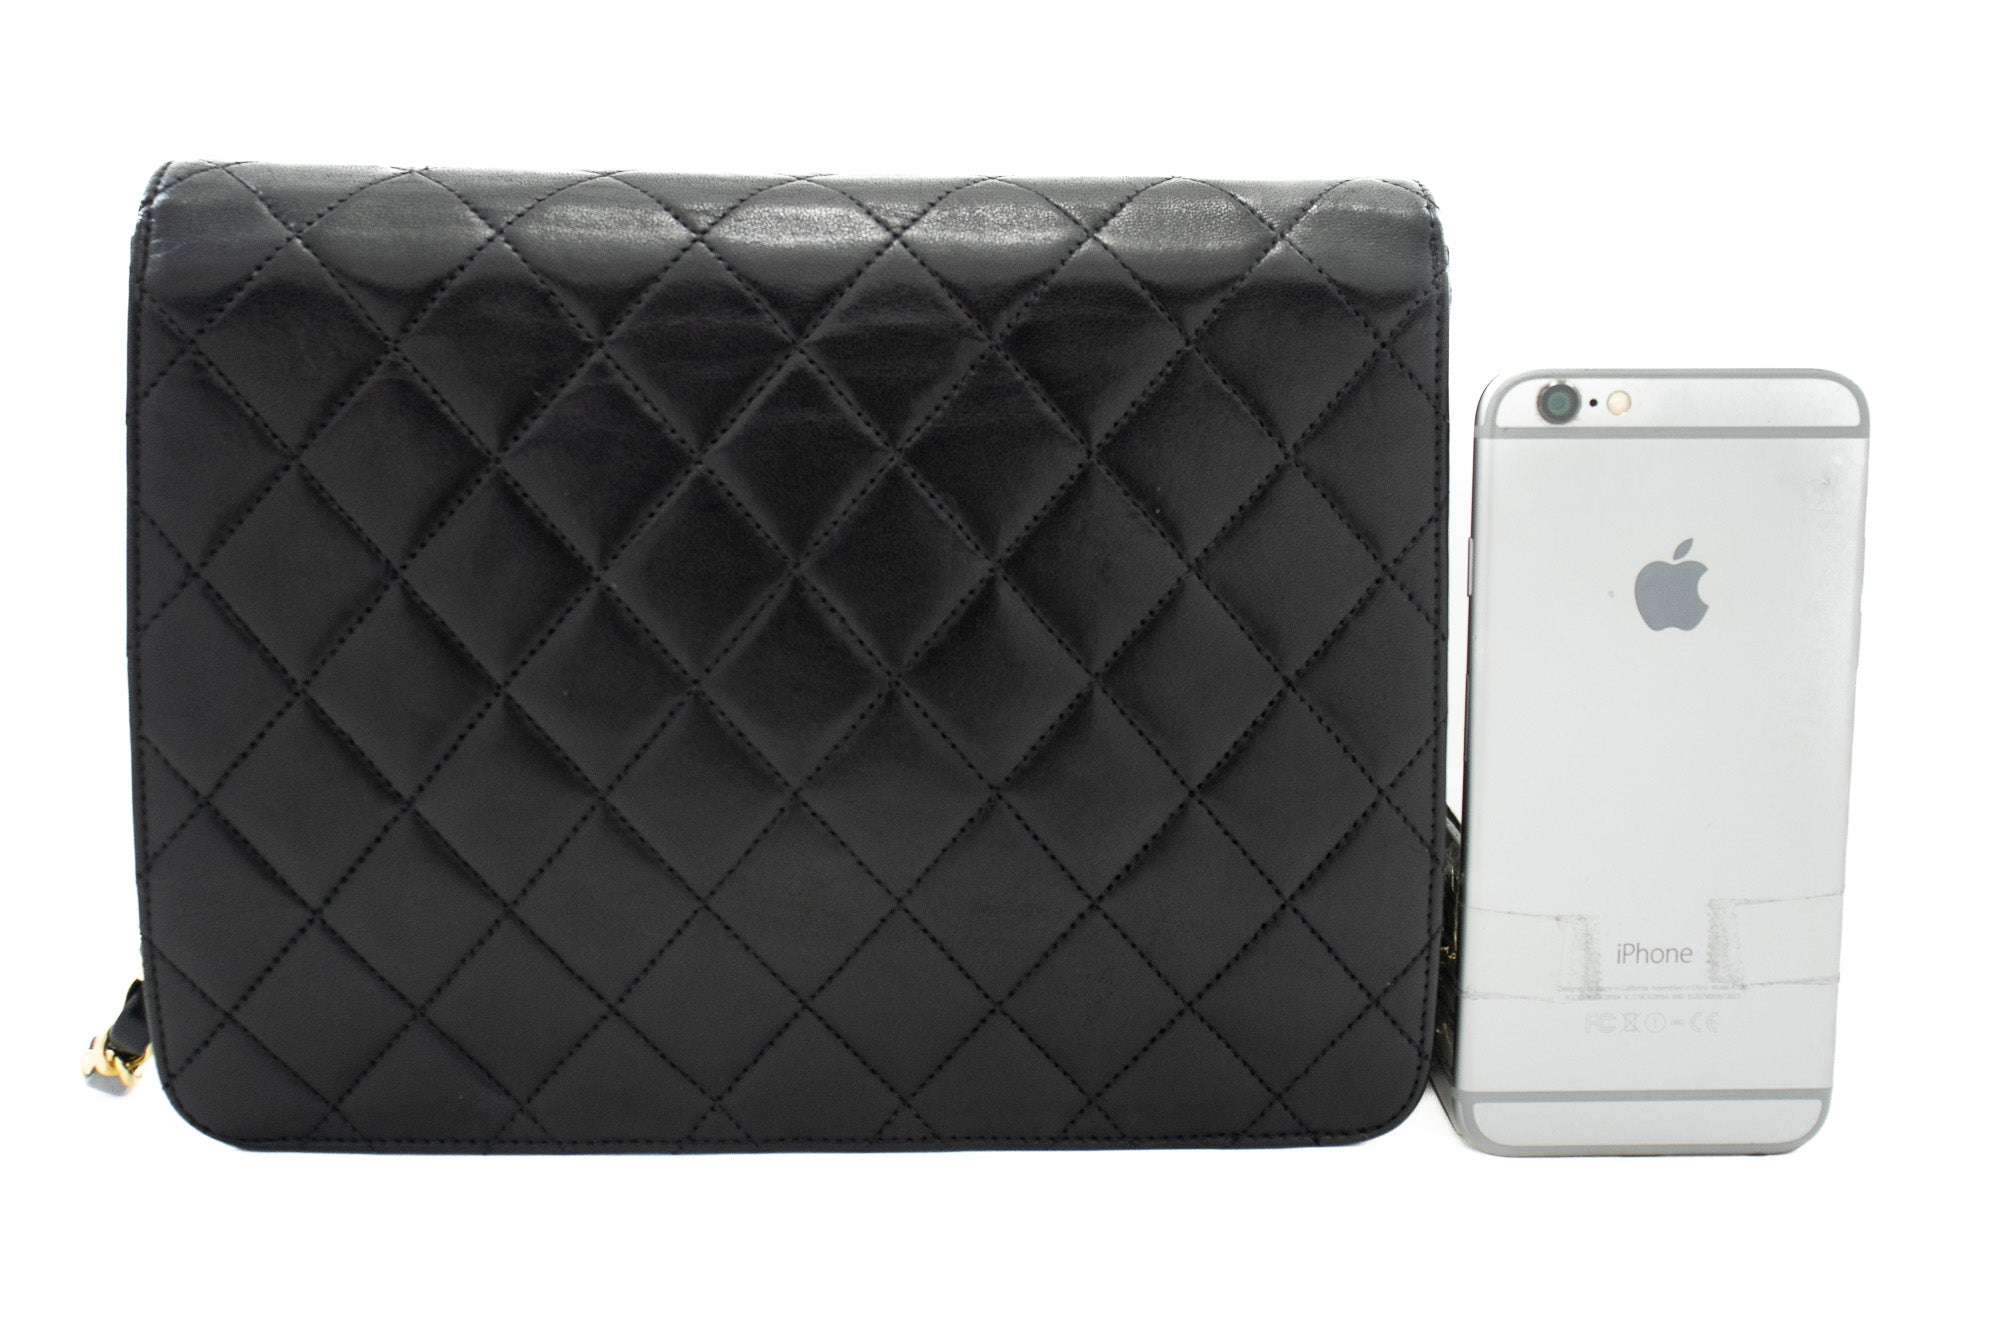 CHANEL, Bags, Chanel Authentic Caviar Leather Ipad Cover